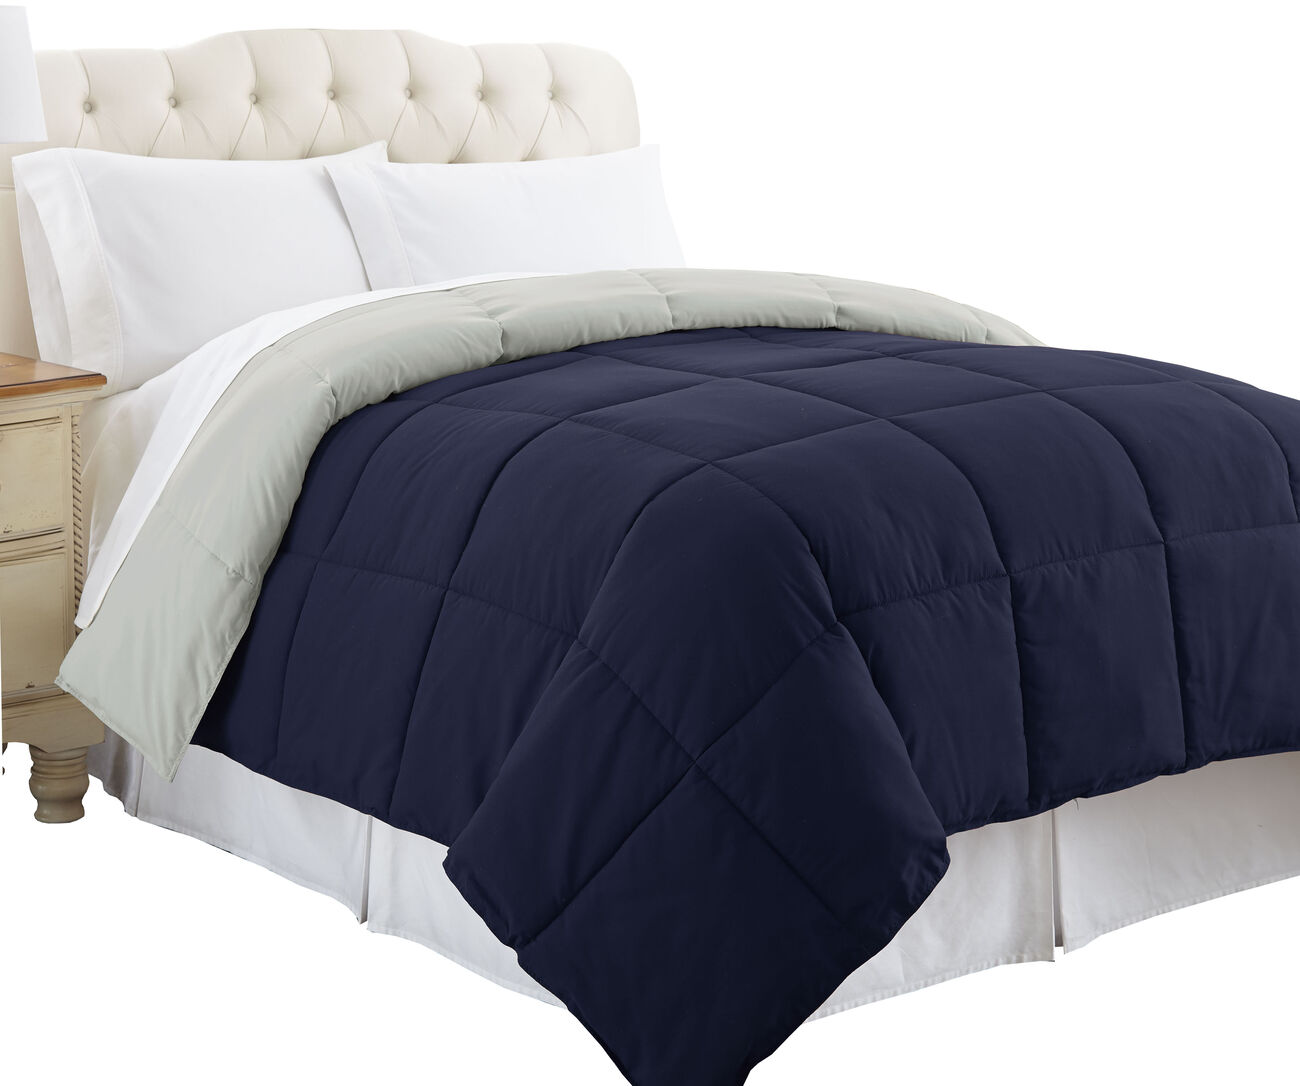 Genoa Reversible Queen Comforter with Box Quilting The Urban Port, Silver and Blue